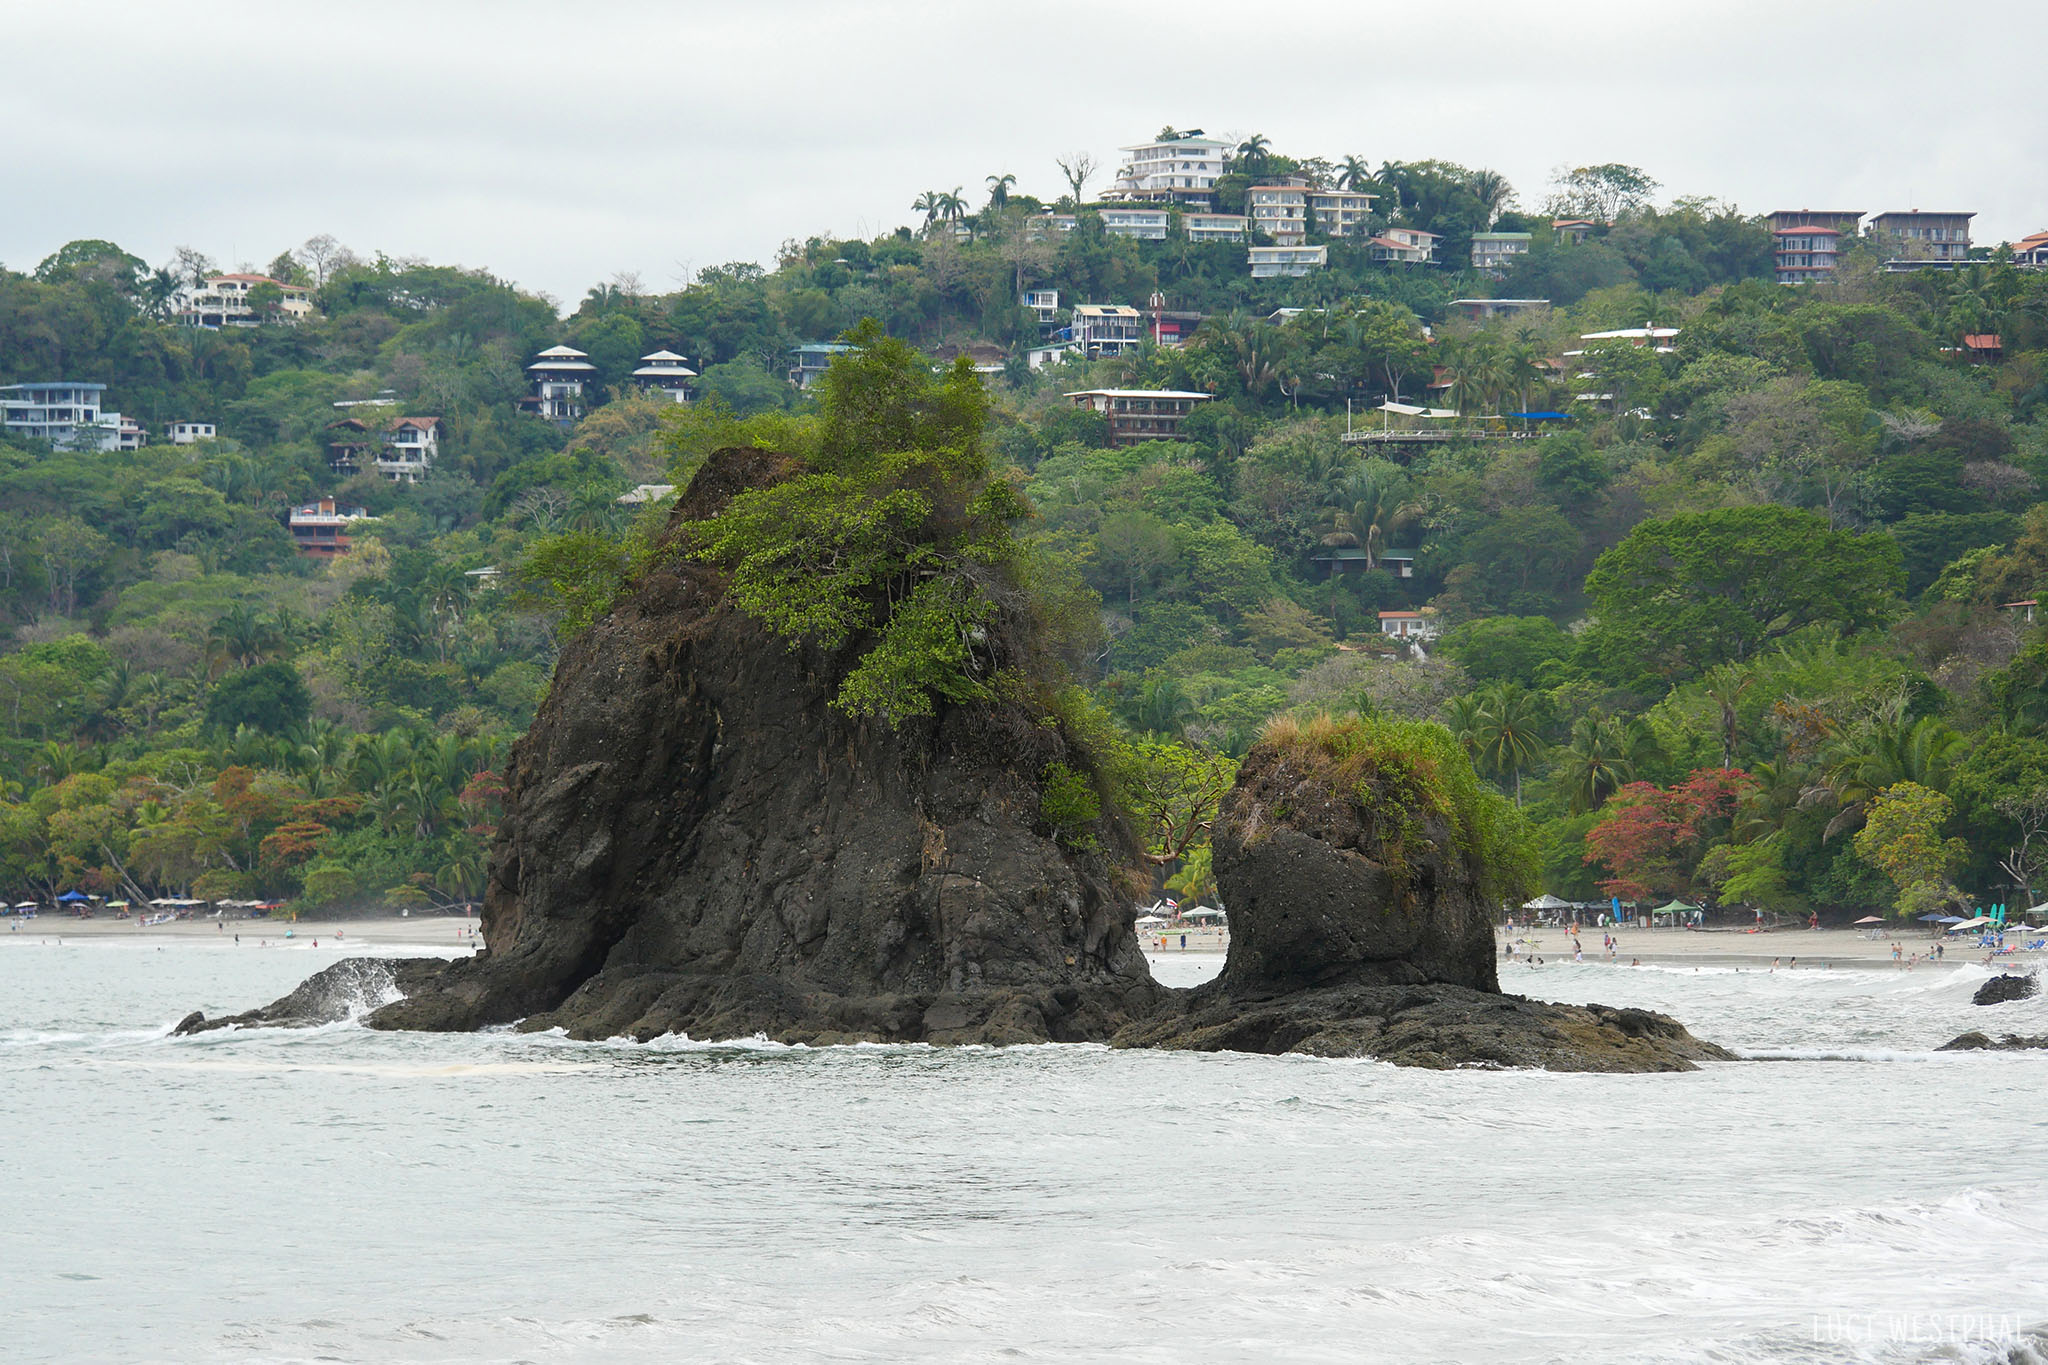 As the shoreline continues north, the town and hostels and rentals near Manuel Antonio National Park come into view as they hug the coastal hills